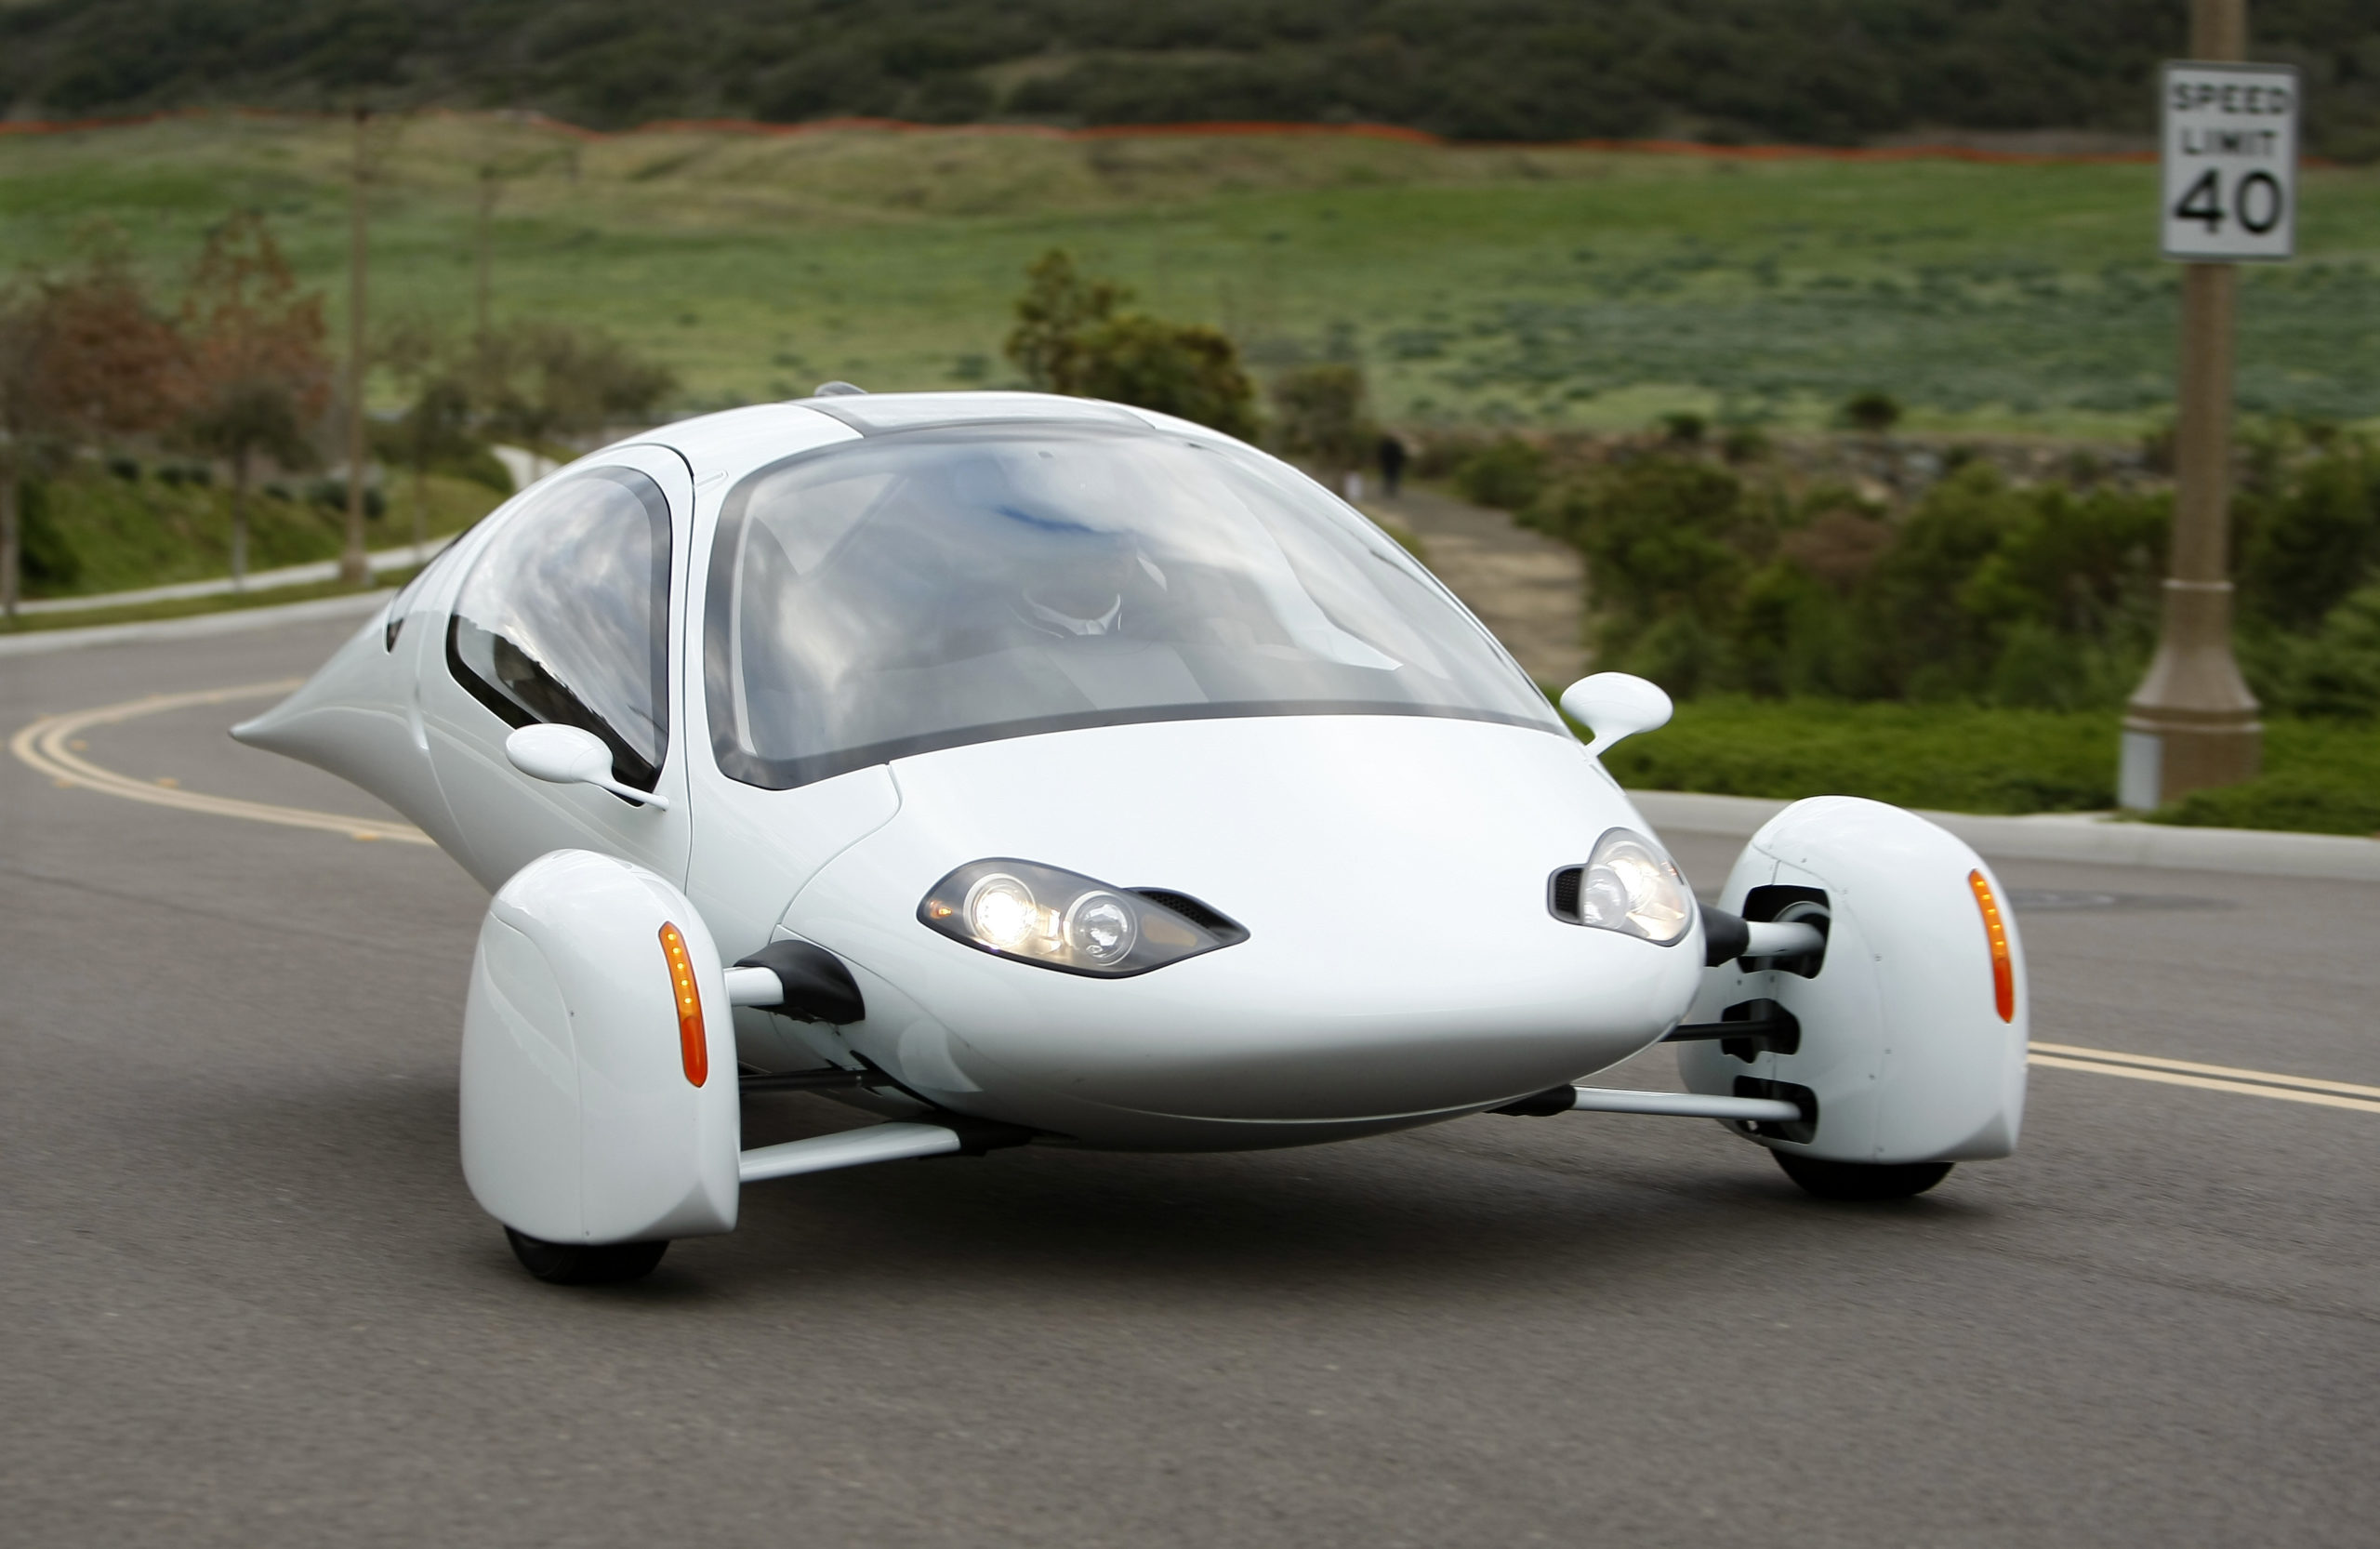 The Aptera 2e electric vehicle is driven down a road in Carlsbad, California February 13, 2009. The Aptera is an egg-shaped two-seater often likened to a space-age car from the futuristic 1960s cartoon "The Jetsons." Looking more like an aircraft than a road vehicle, it is a far cry from the hybrid sedans and electric sports cars being produced by conventional automakers. To the executives behind the vehicle, its aerodynamic design and 100 miles per gallon (42 km per litre) range points the way to the future. Picture taken February 13, 2009. To match feature APTERA/ REUTERS/Mike Blake (UNITED STATES)